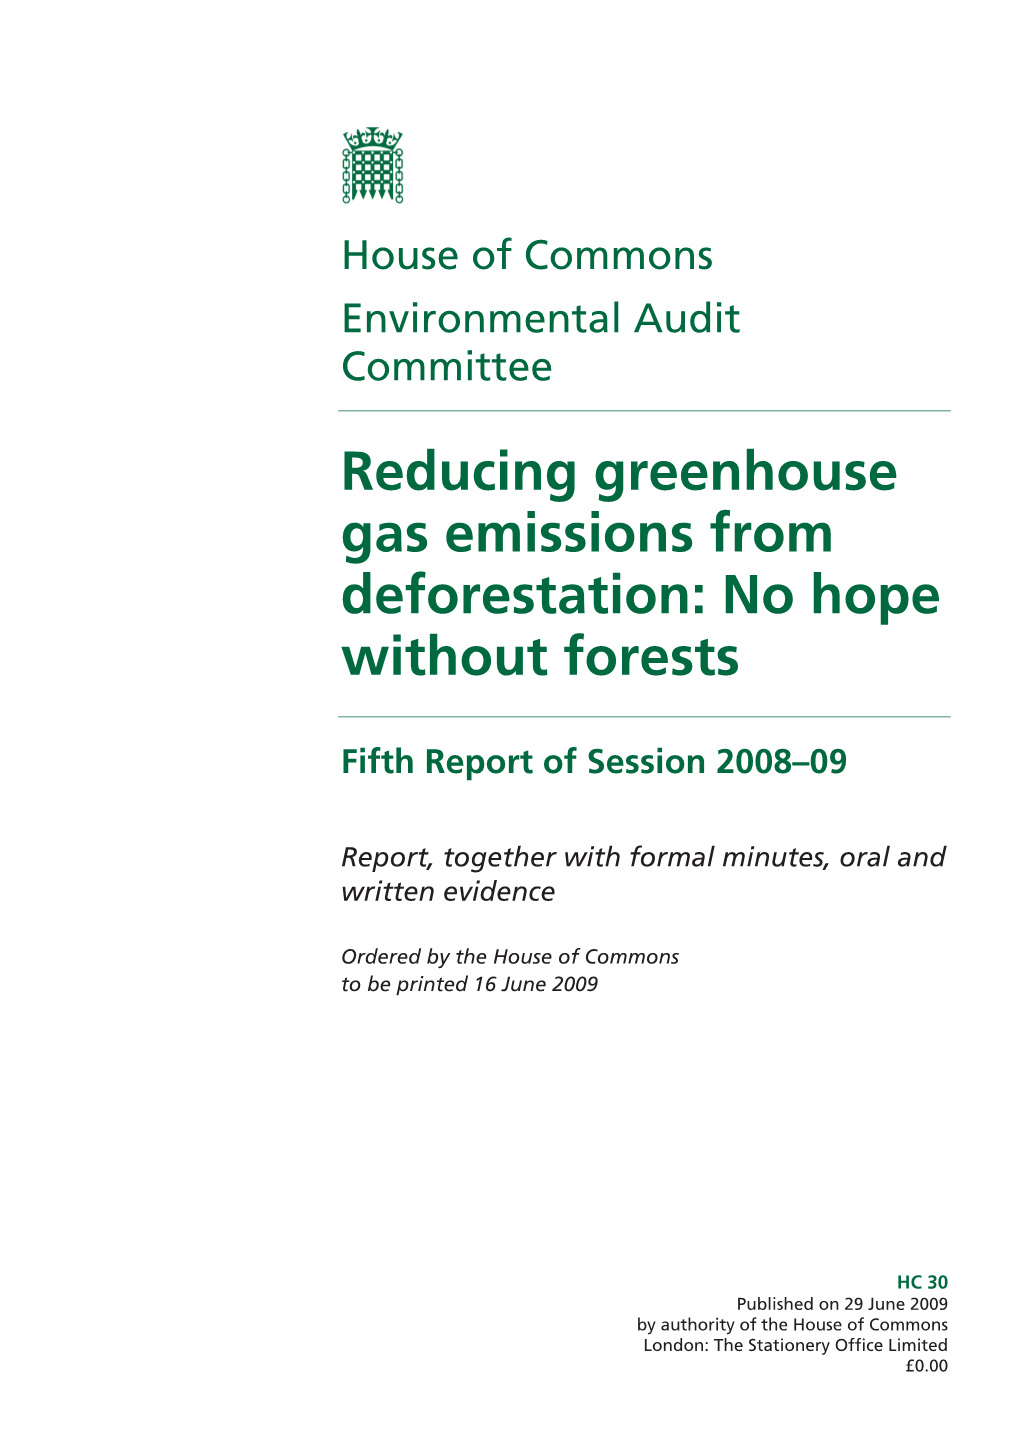 Reducing Greenhouse Gas Emissions from Deforestation: No Hope Without Forests